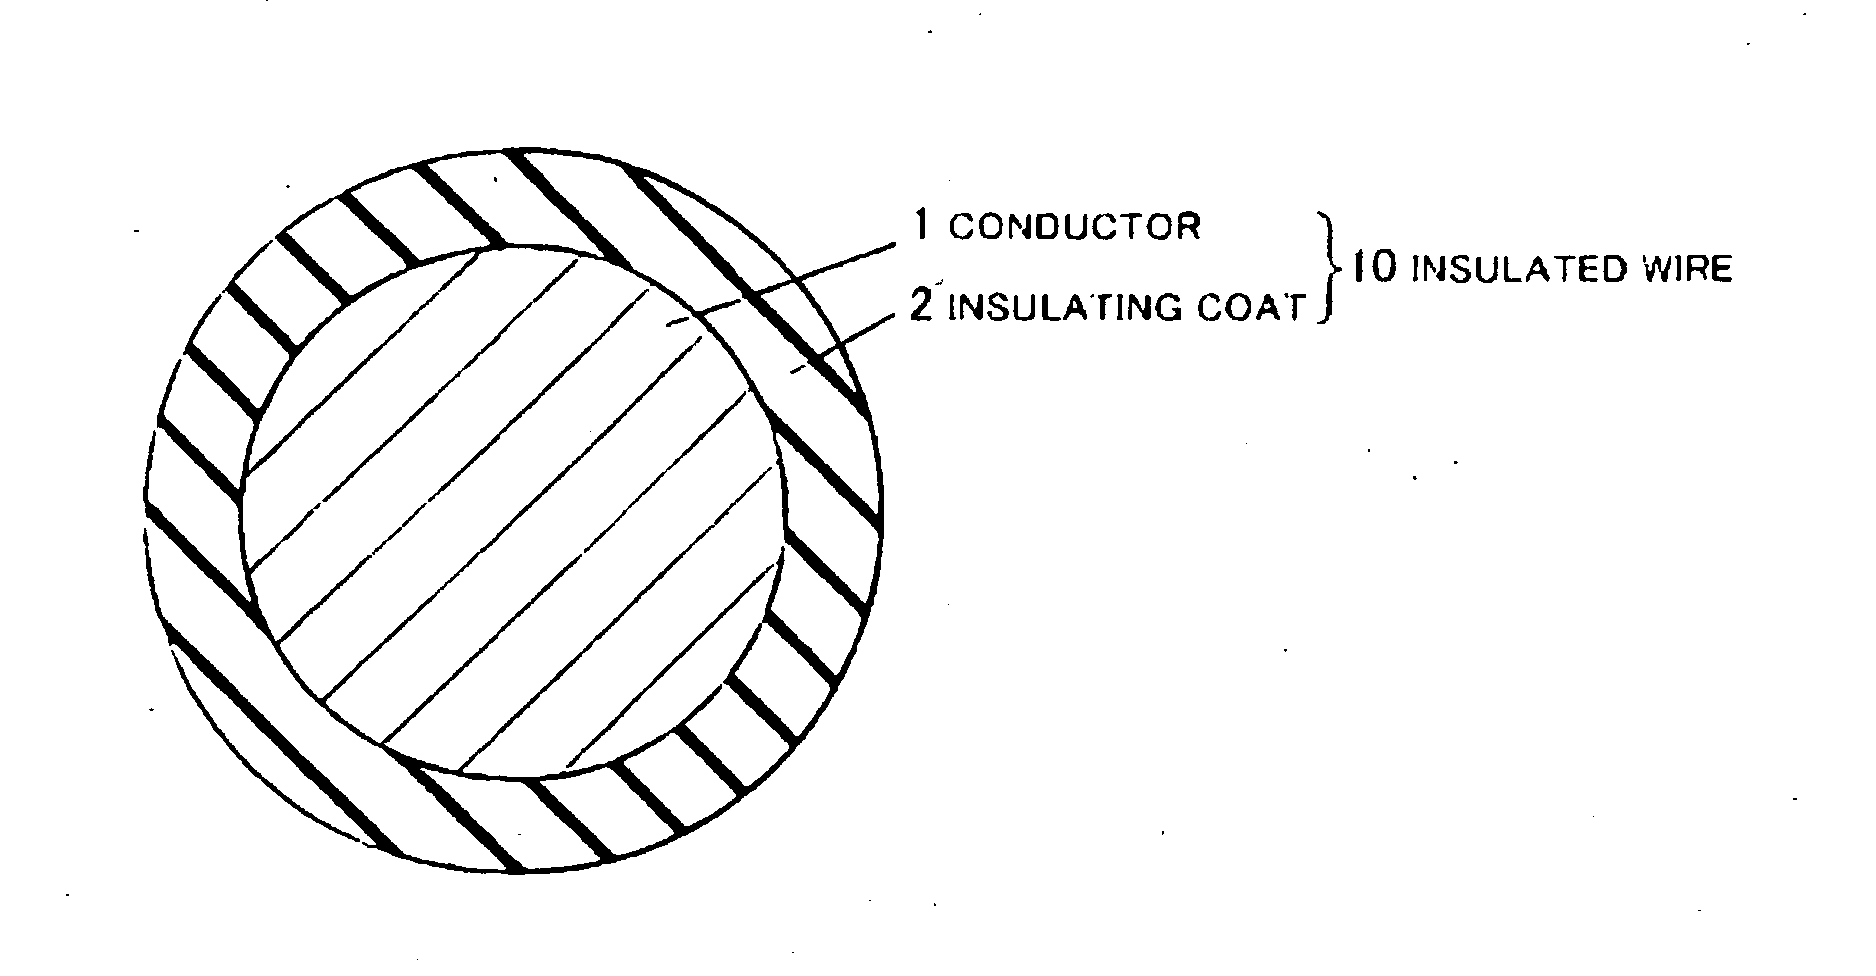 Insulating varnish and insulated wire formed by using the same